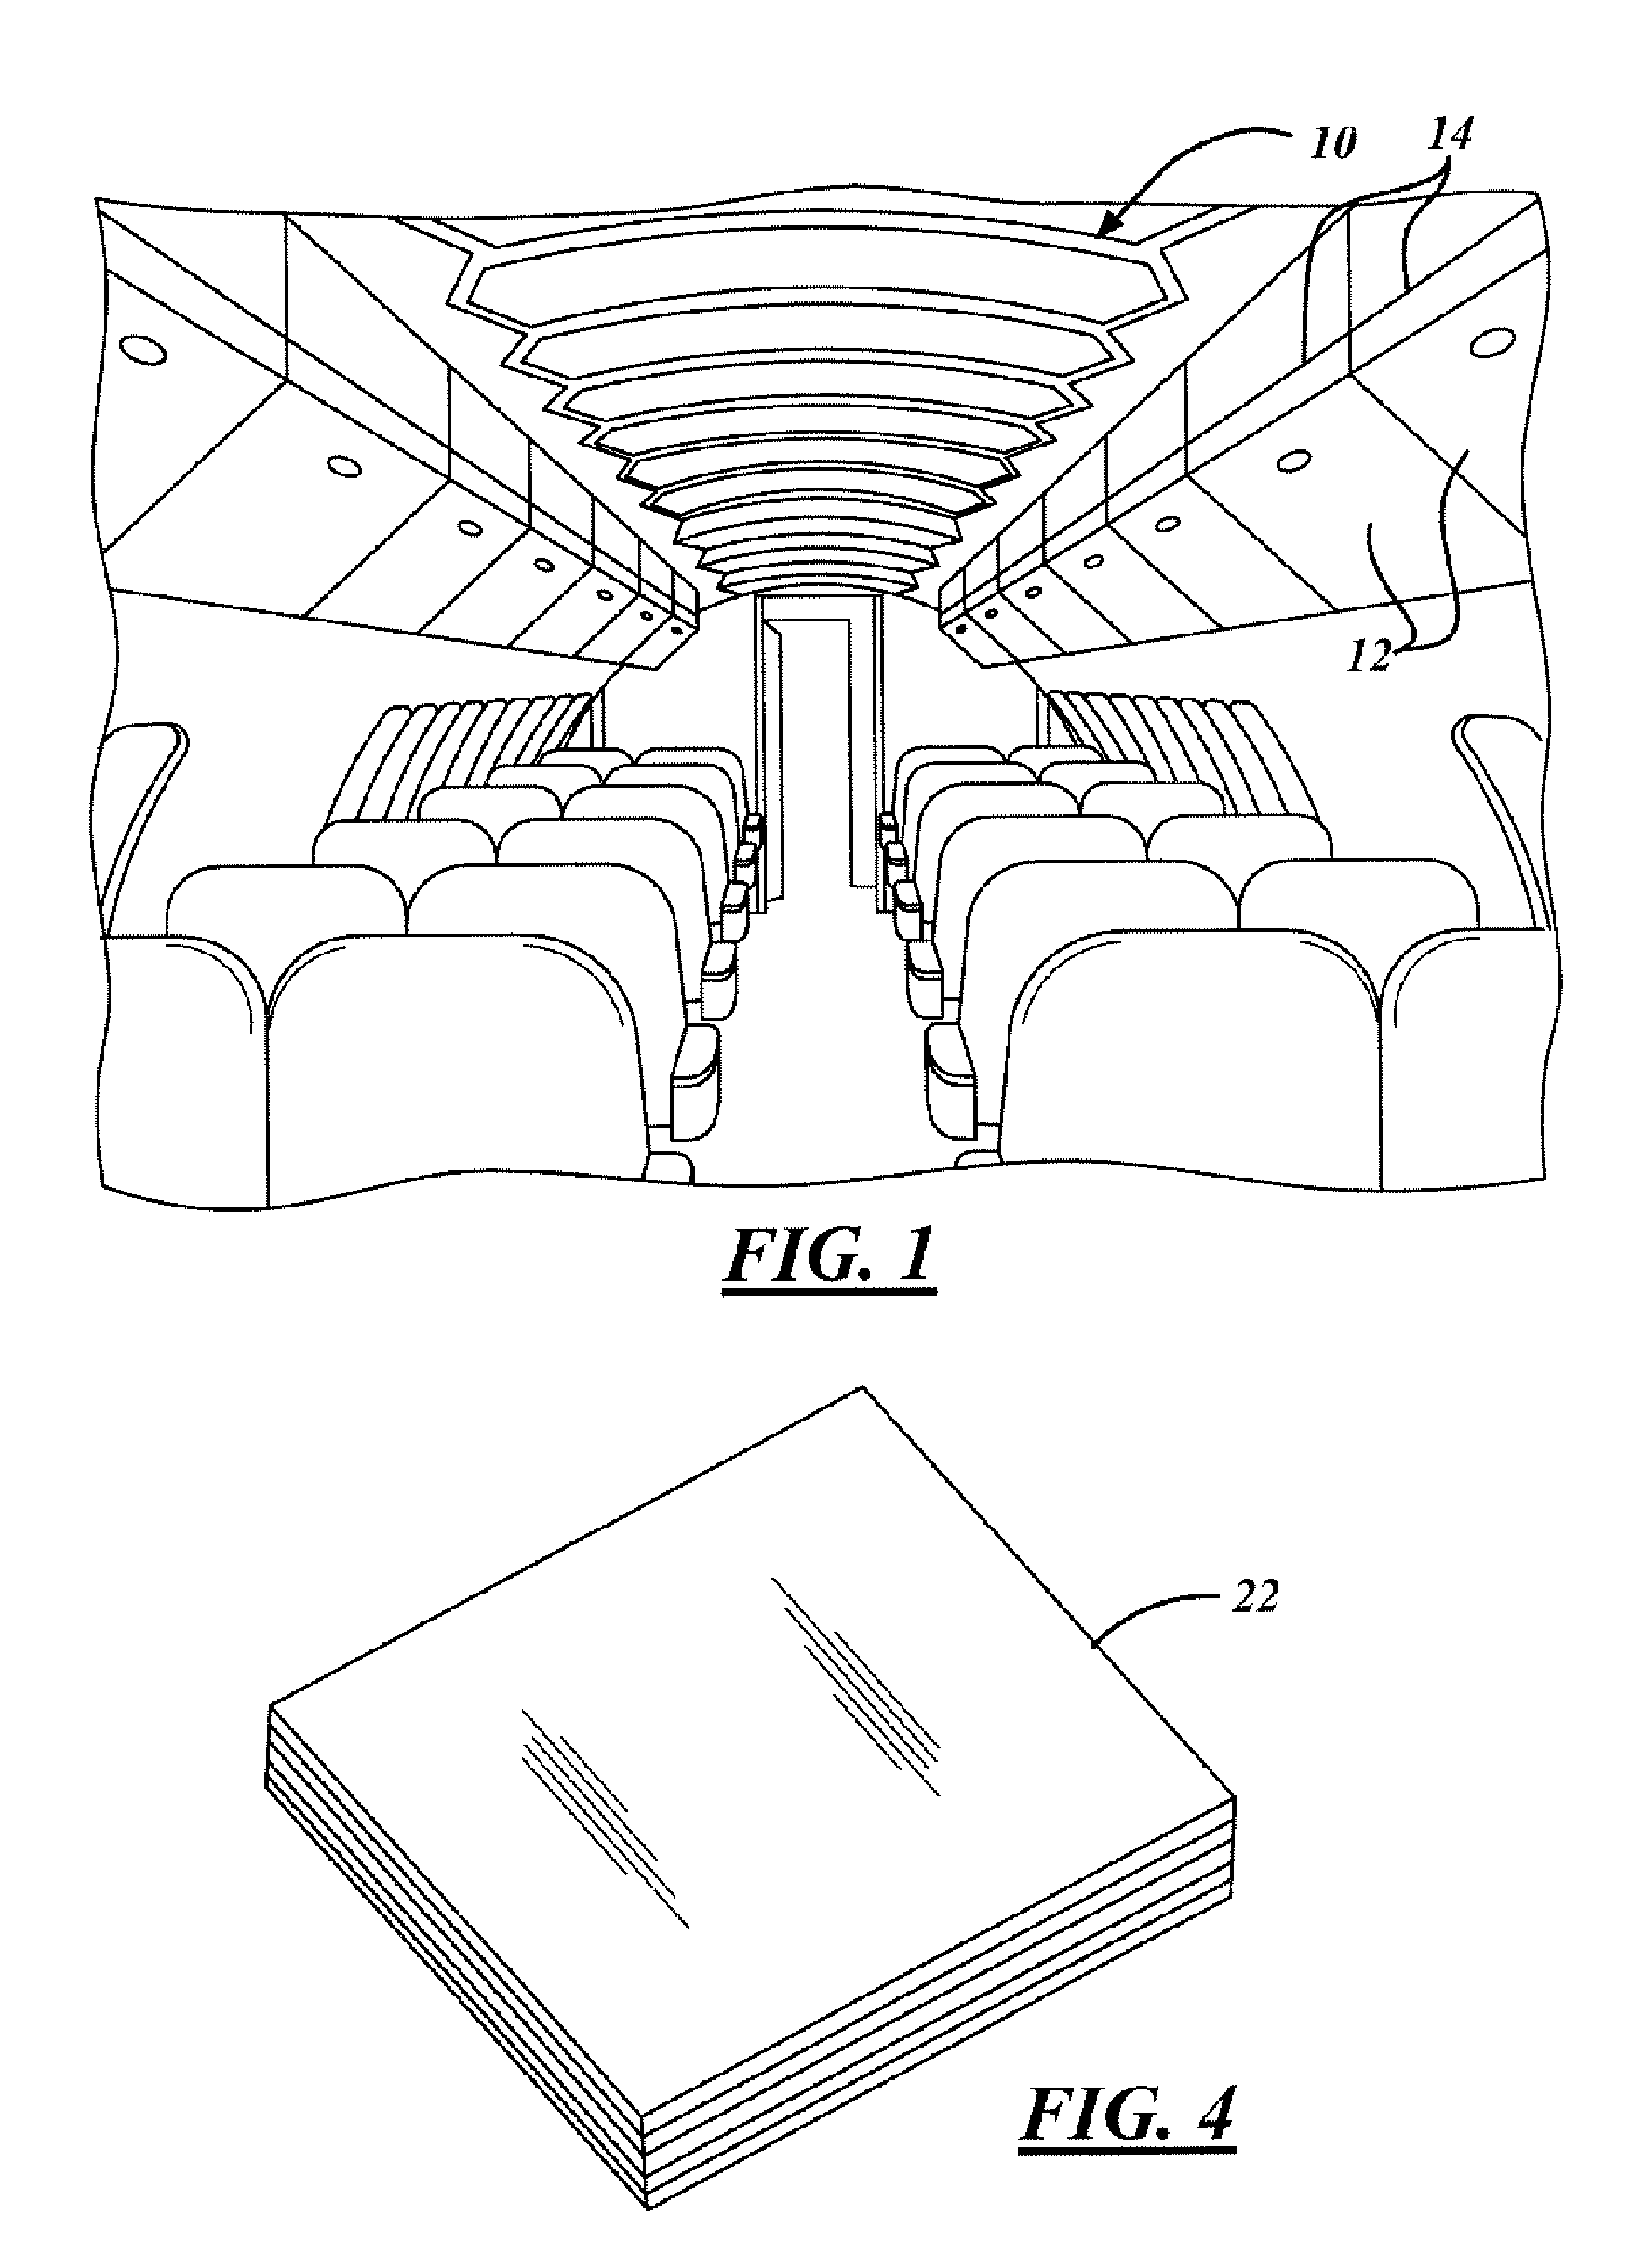 Protective cover and tool splash for vehicle components